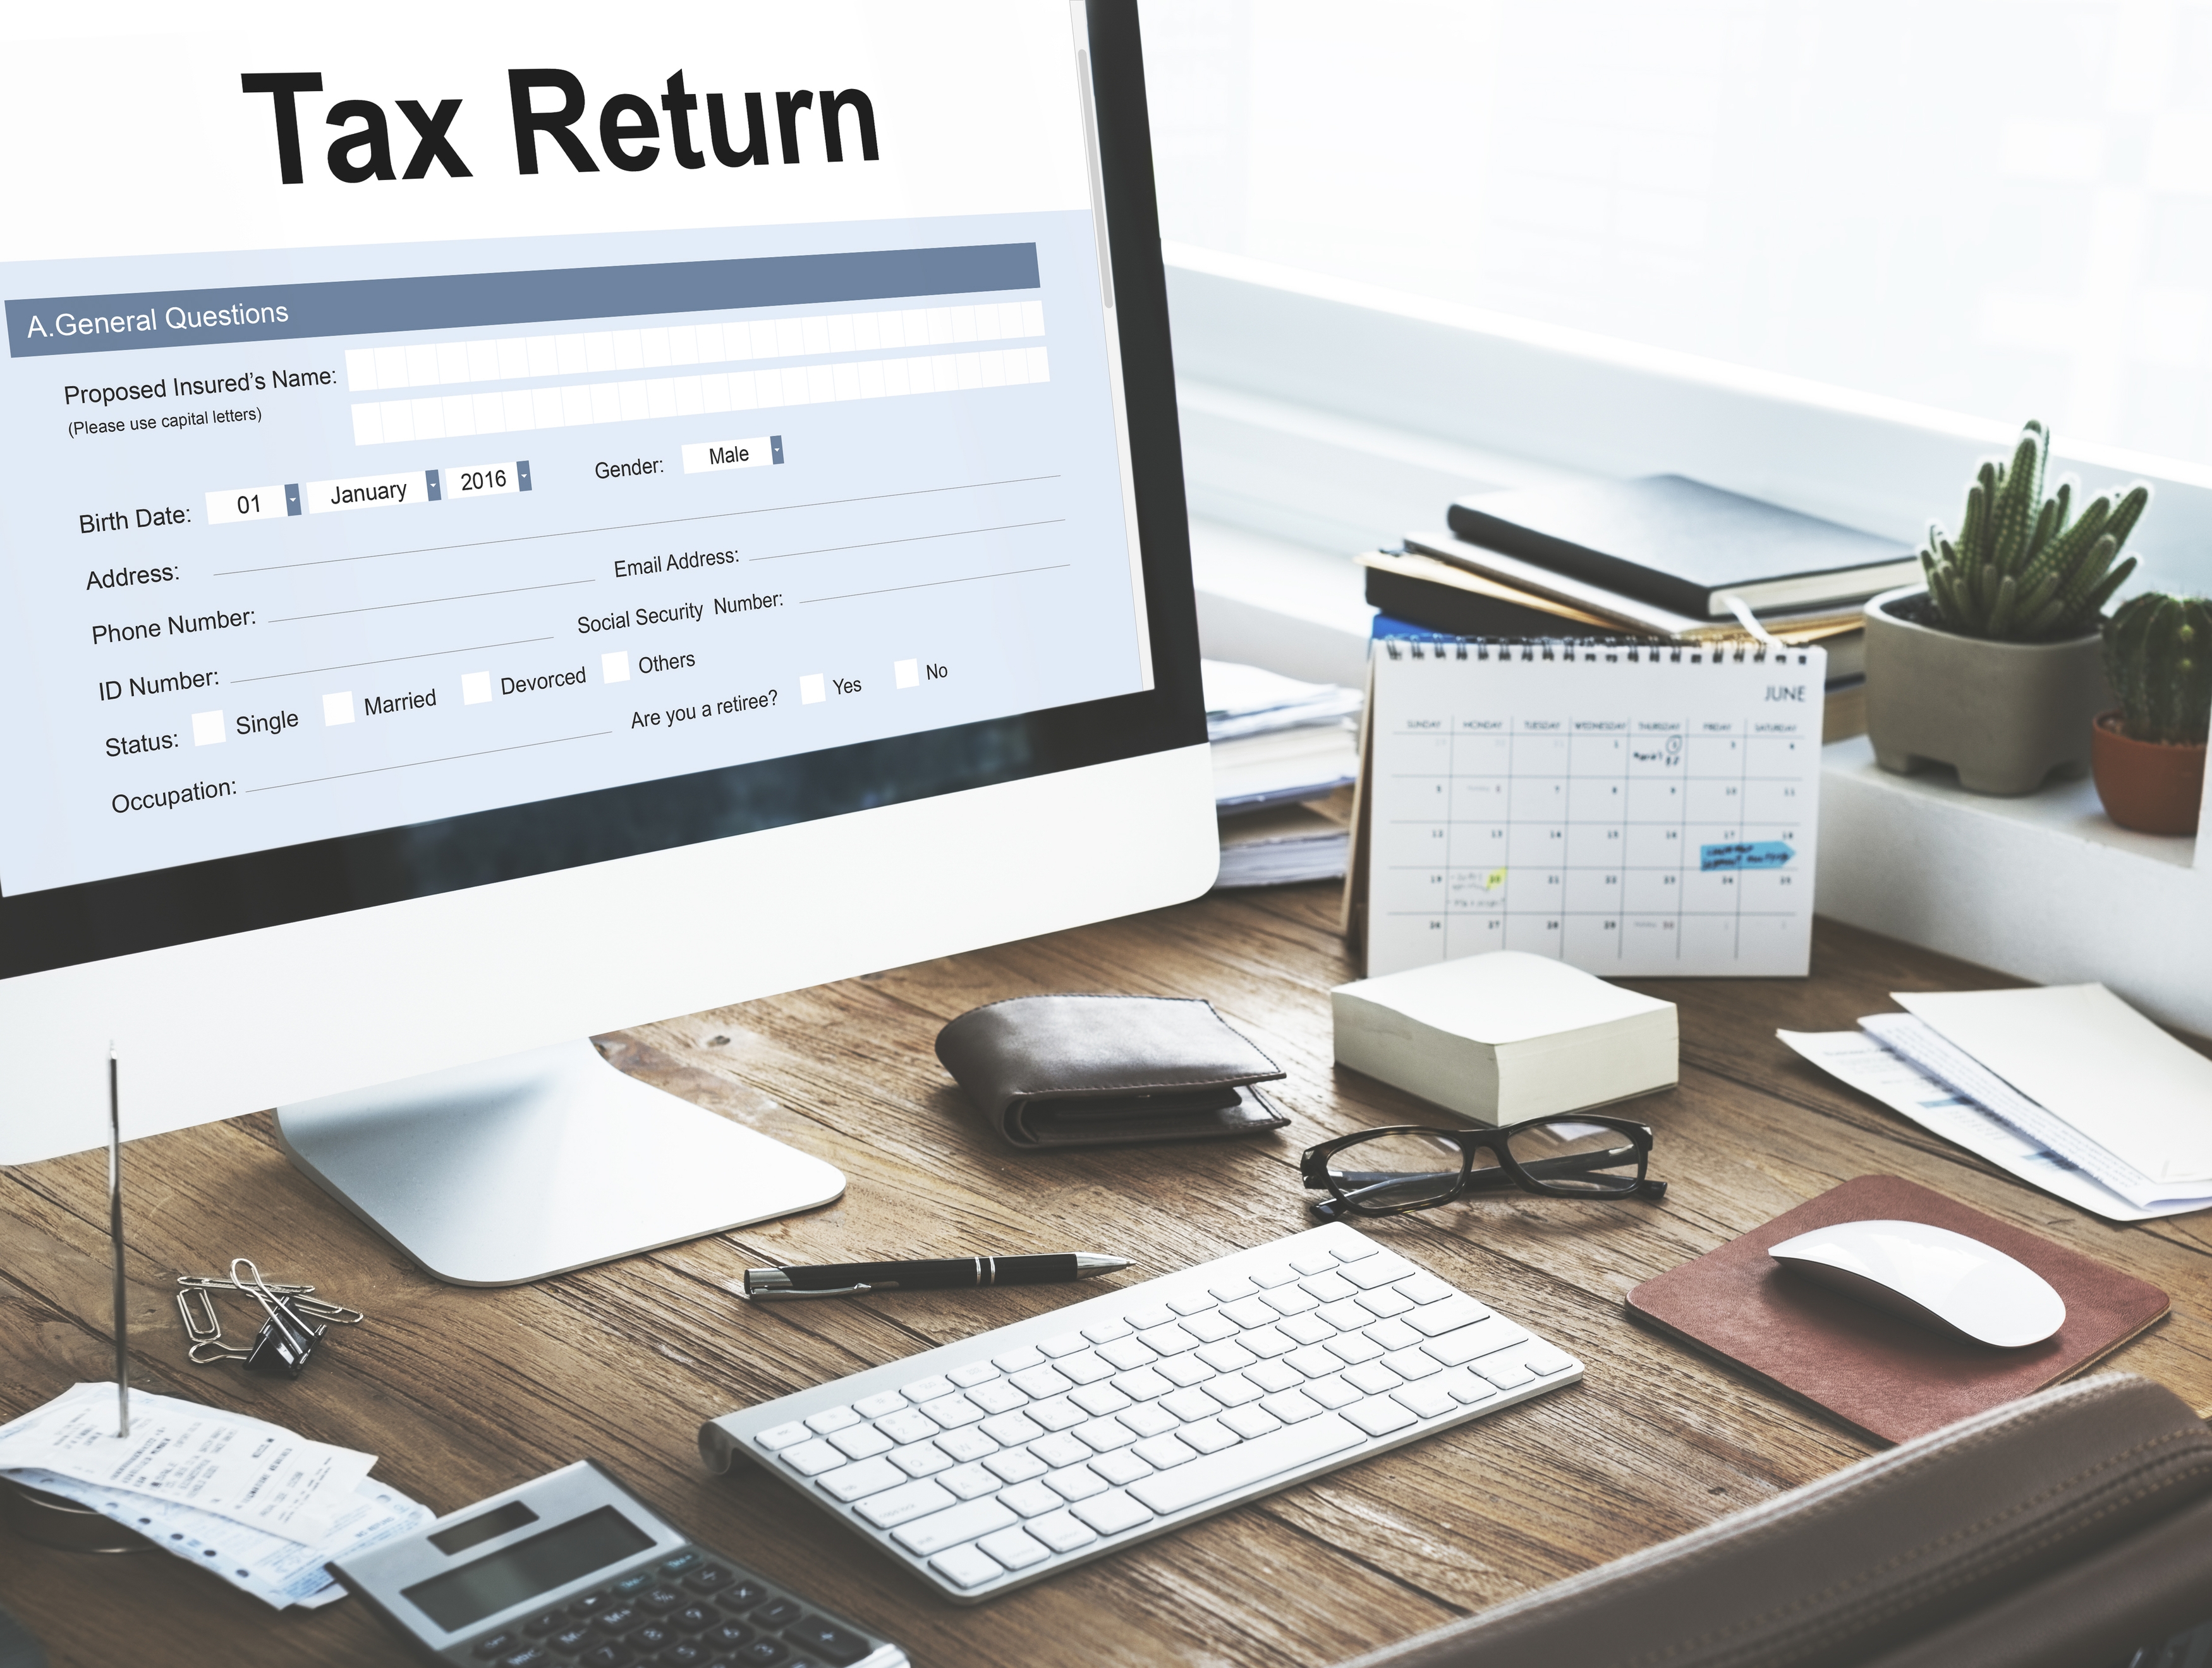 3: Taxes and Tax Planning